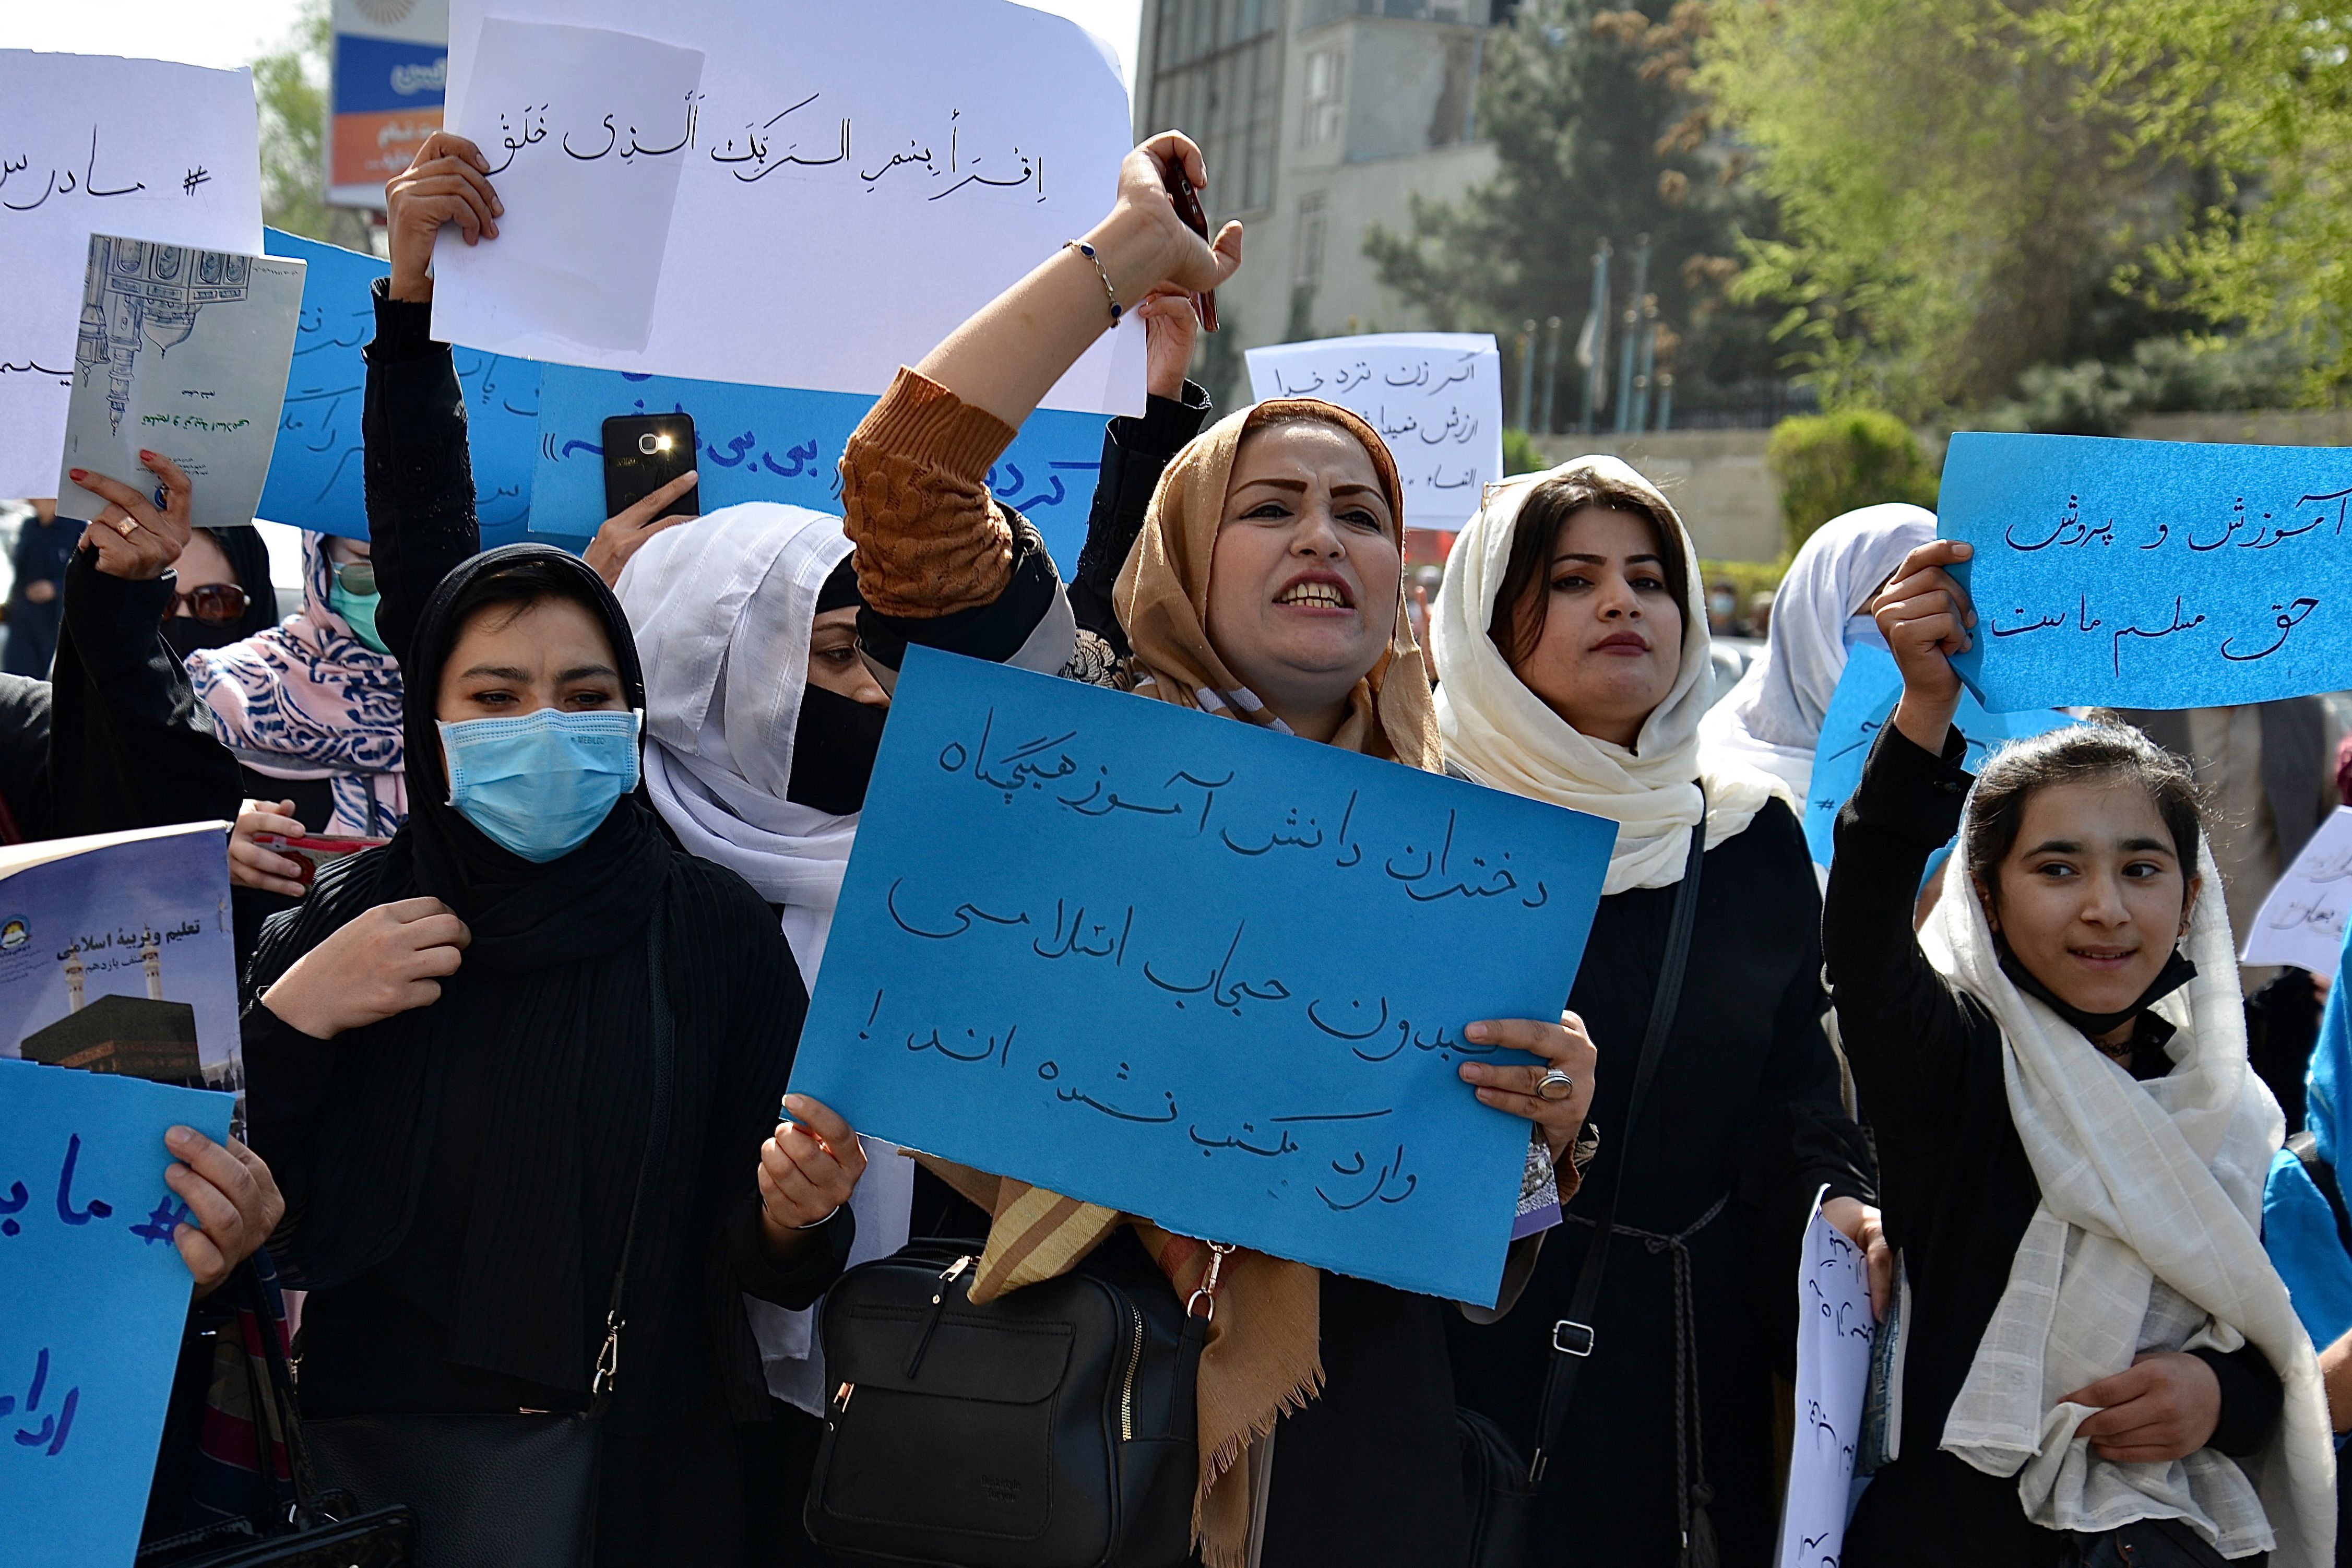 Afghan women and girls take part in a protest in front of the Ministry of Education in Kabul on March 26, 2022